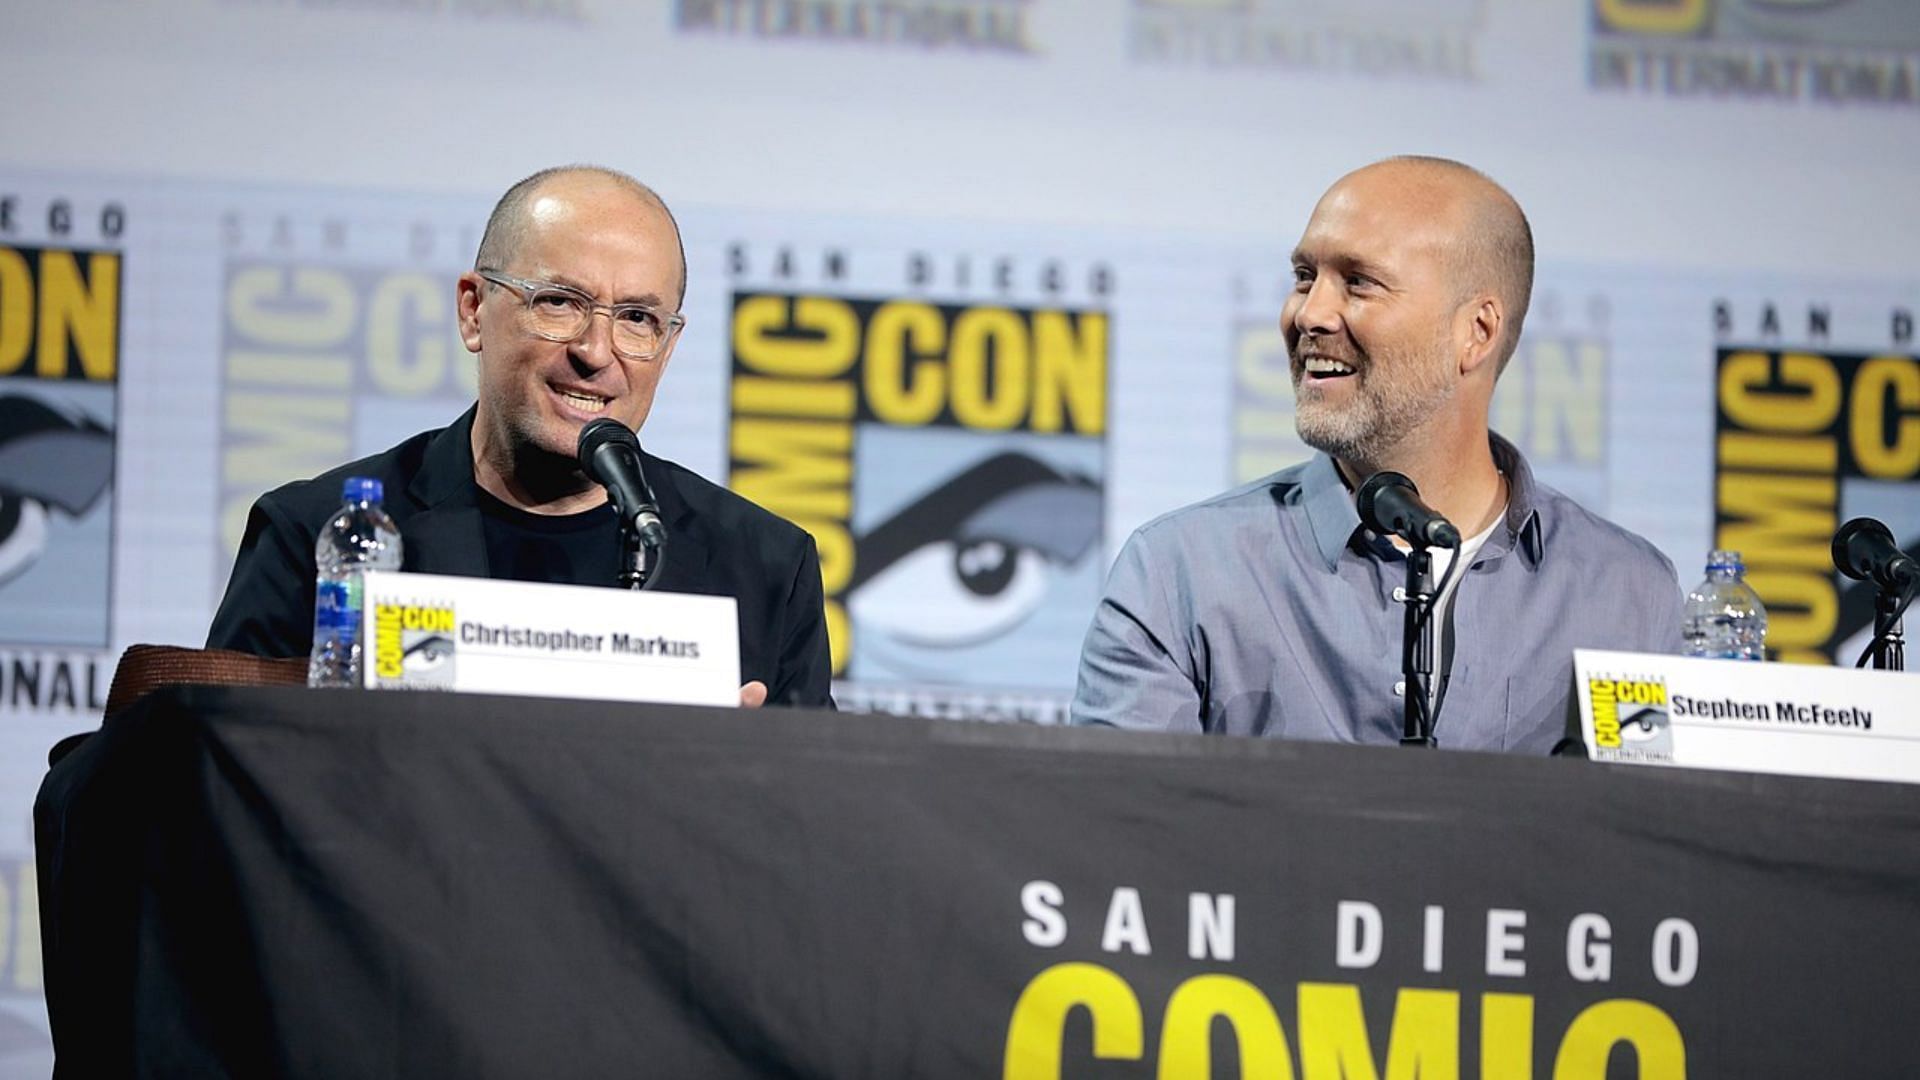 Christopher Markus and Stephen McFeely speaking at the 2019 San Diego Comic Con International, for Writing Avengers Endgame (Image via Wikipedia)